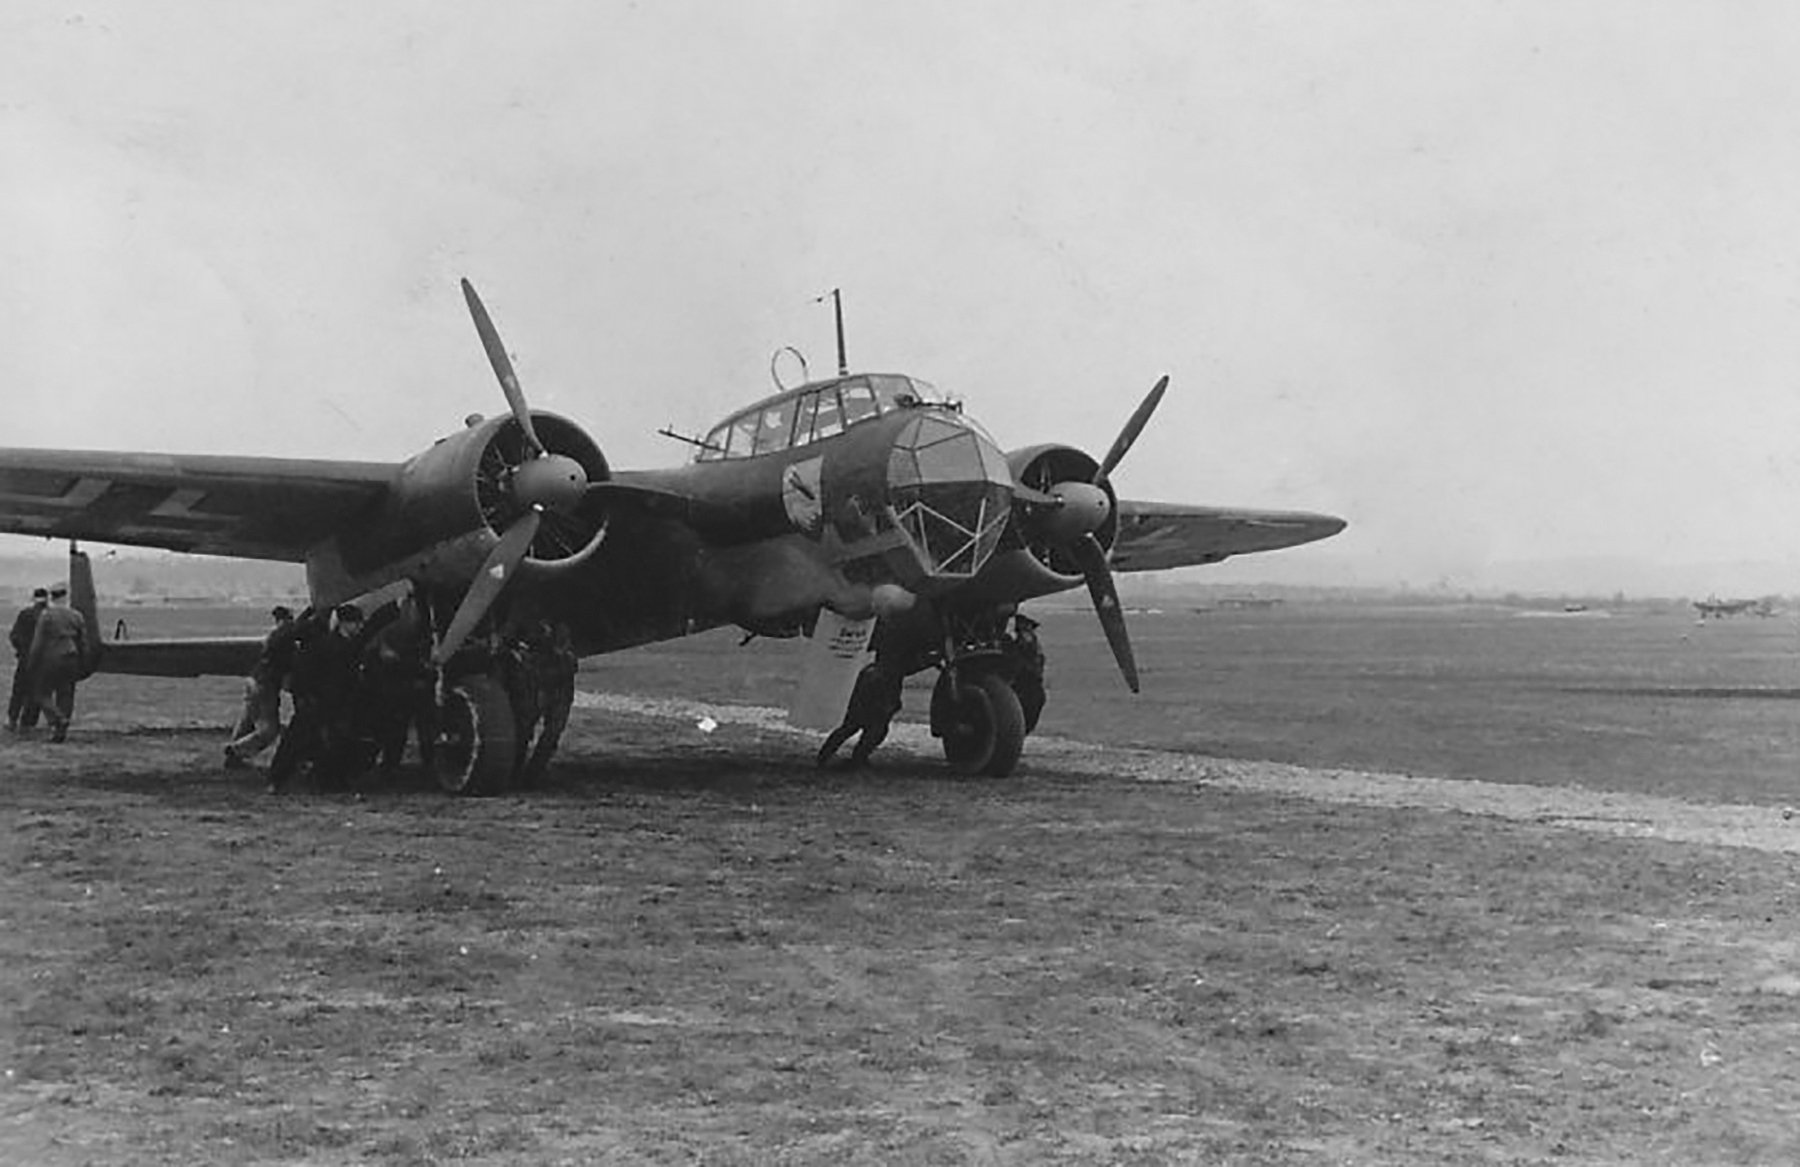 Dornier Do 17Z 3.KG76 being moved the hard way as luftwaffe personnel help to push the aircraft ebay 01